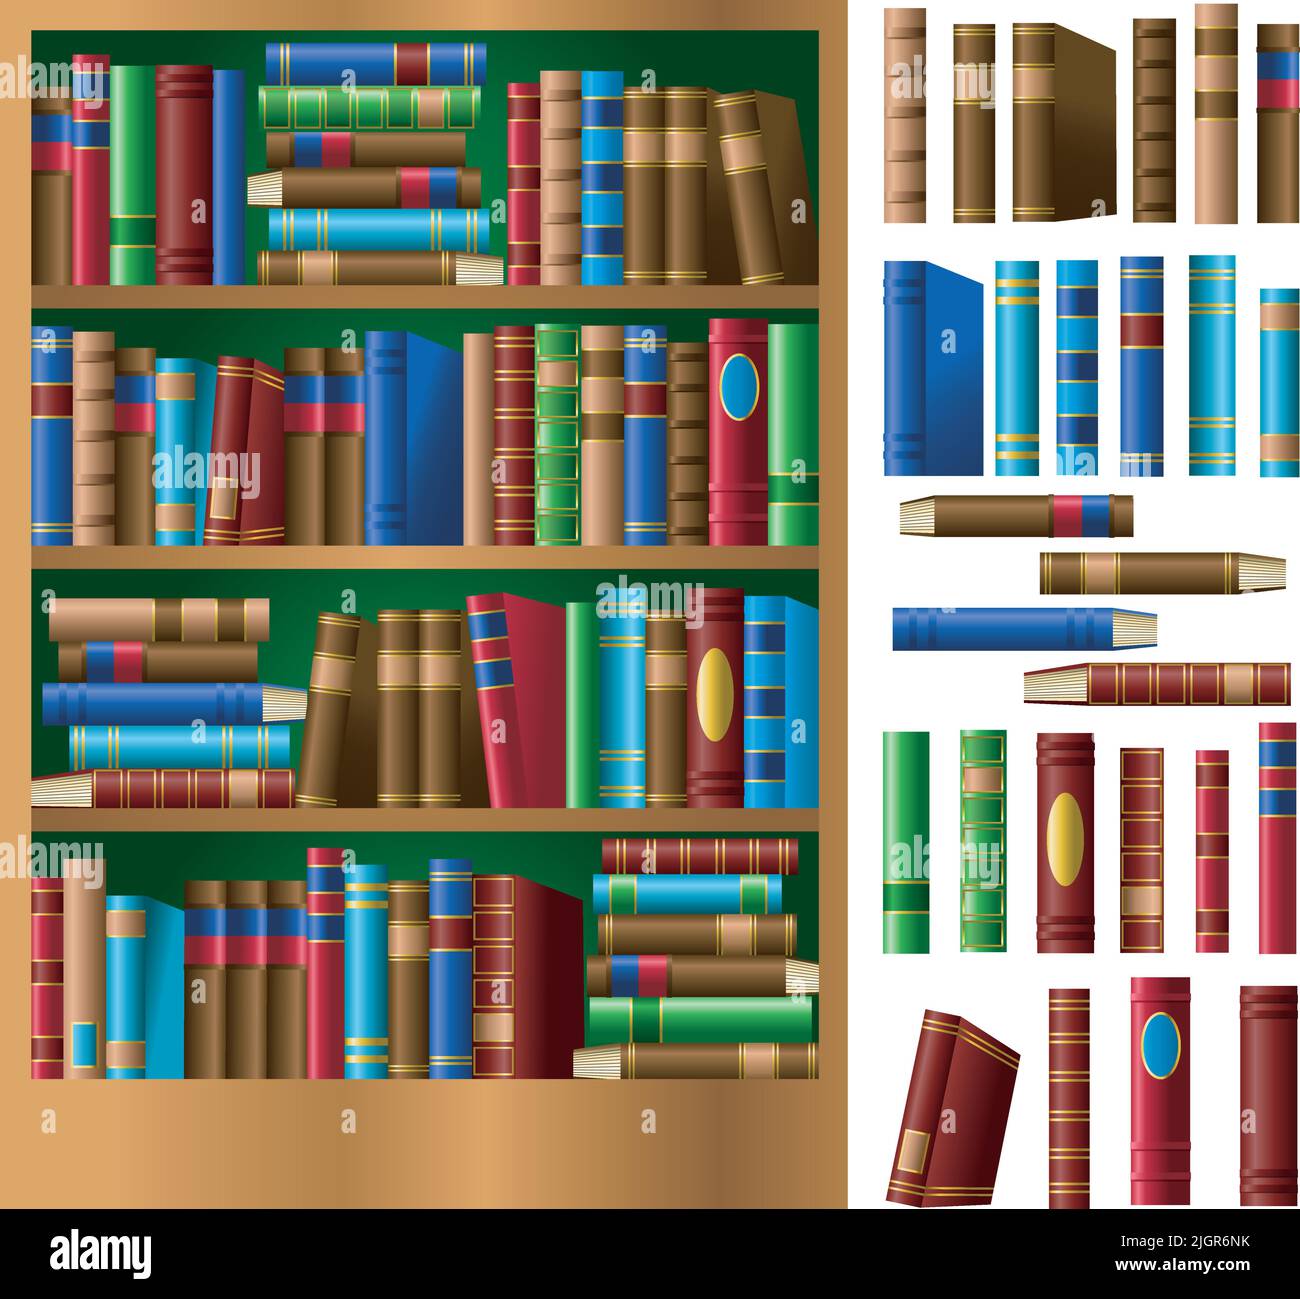 A graphic vector illustration of a book shelf and leather-bound books. Stock Vector